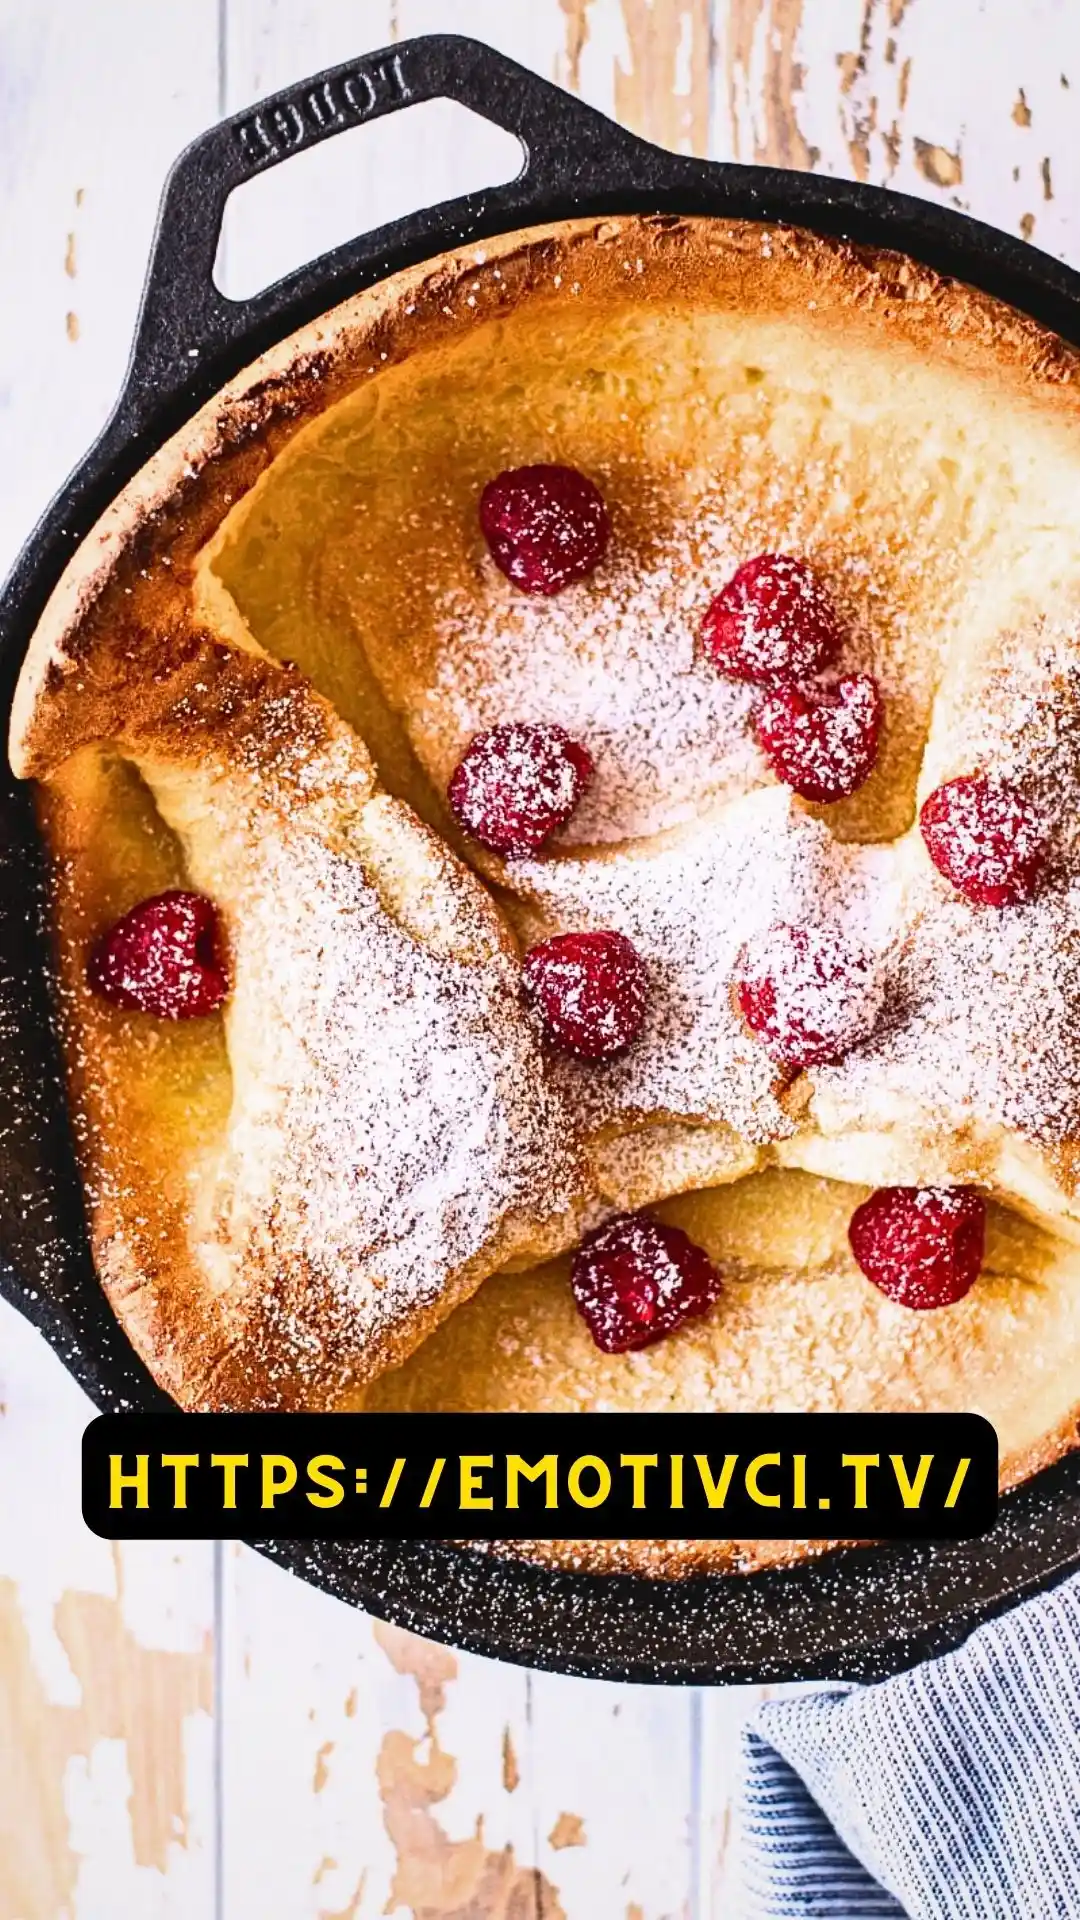 A Sweet and Nutty Brunch Treat: Almond Dutch Baby